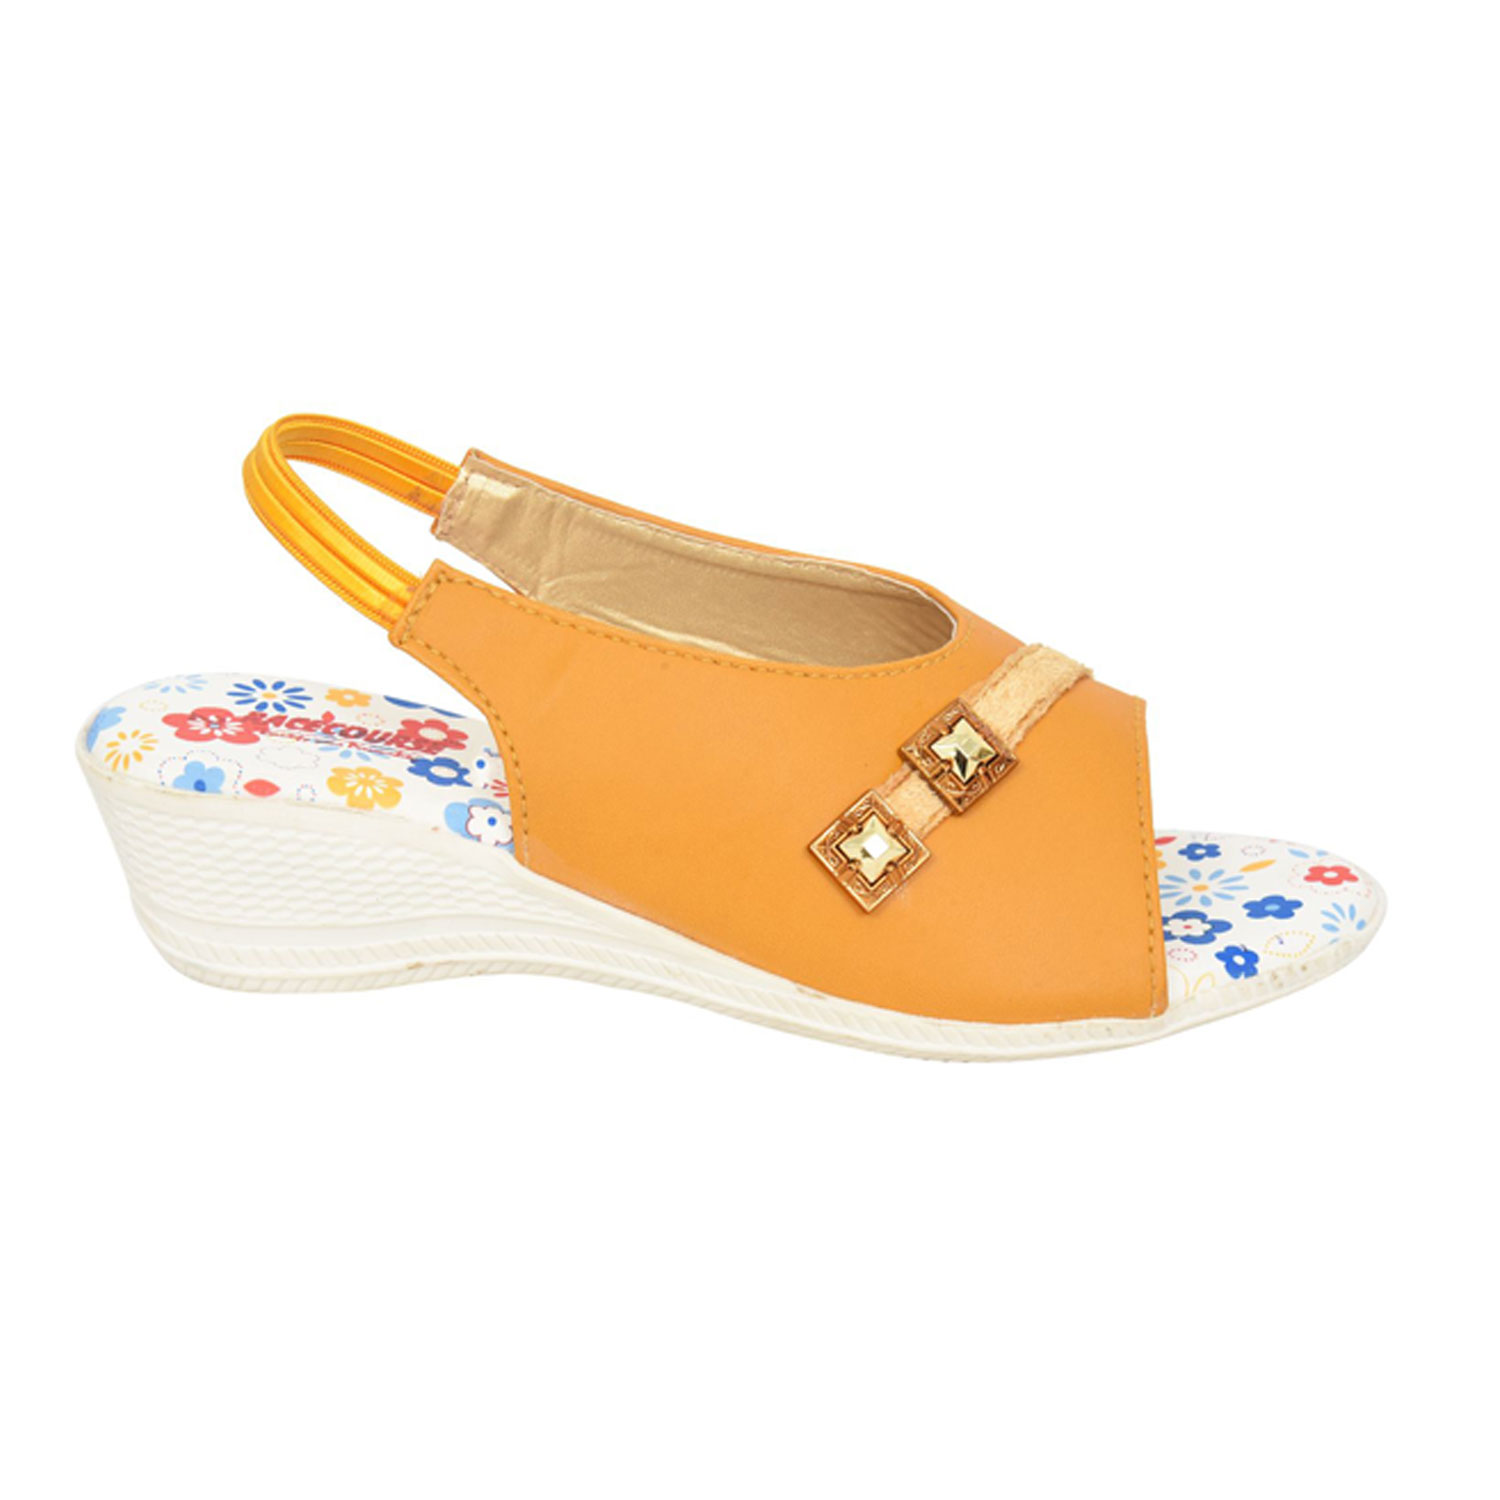 Racecourse Girl's Wedges Heel Artificial Leather Bantu News Sandal With the Heel Height of 1.5 Inch 3003 Yellow(Pack of 8)